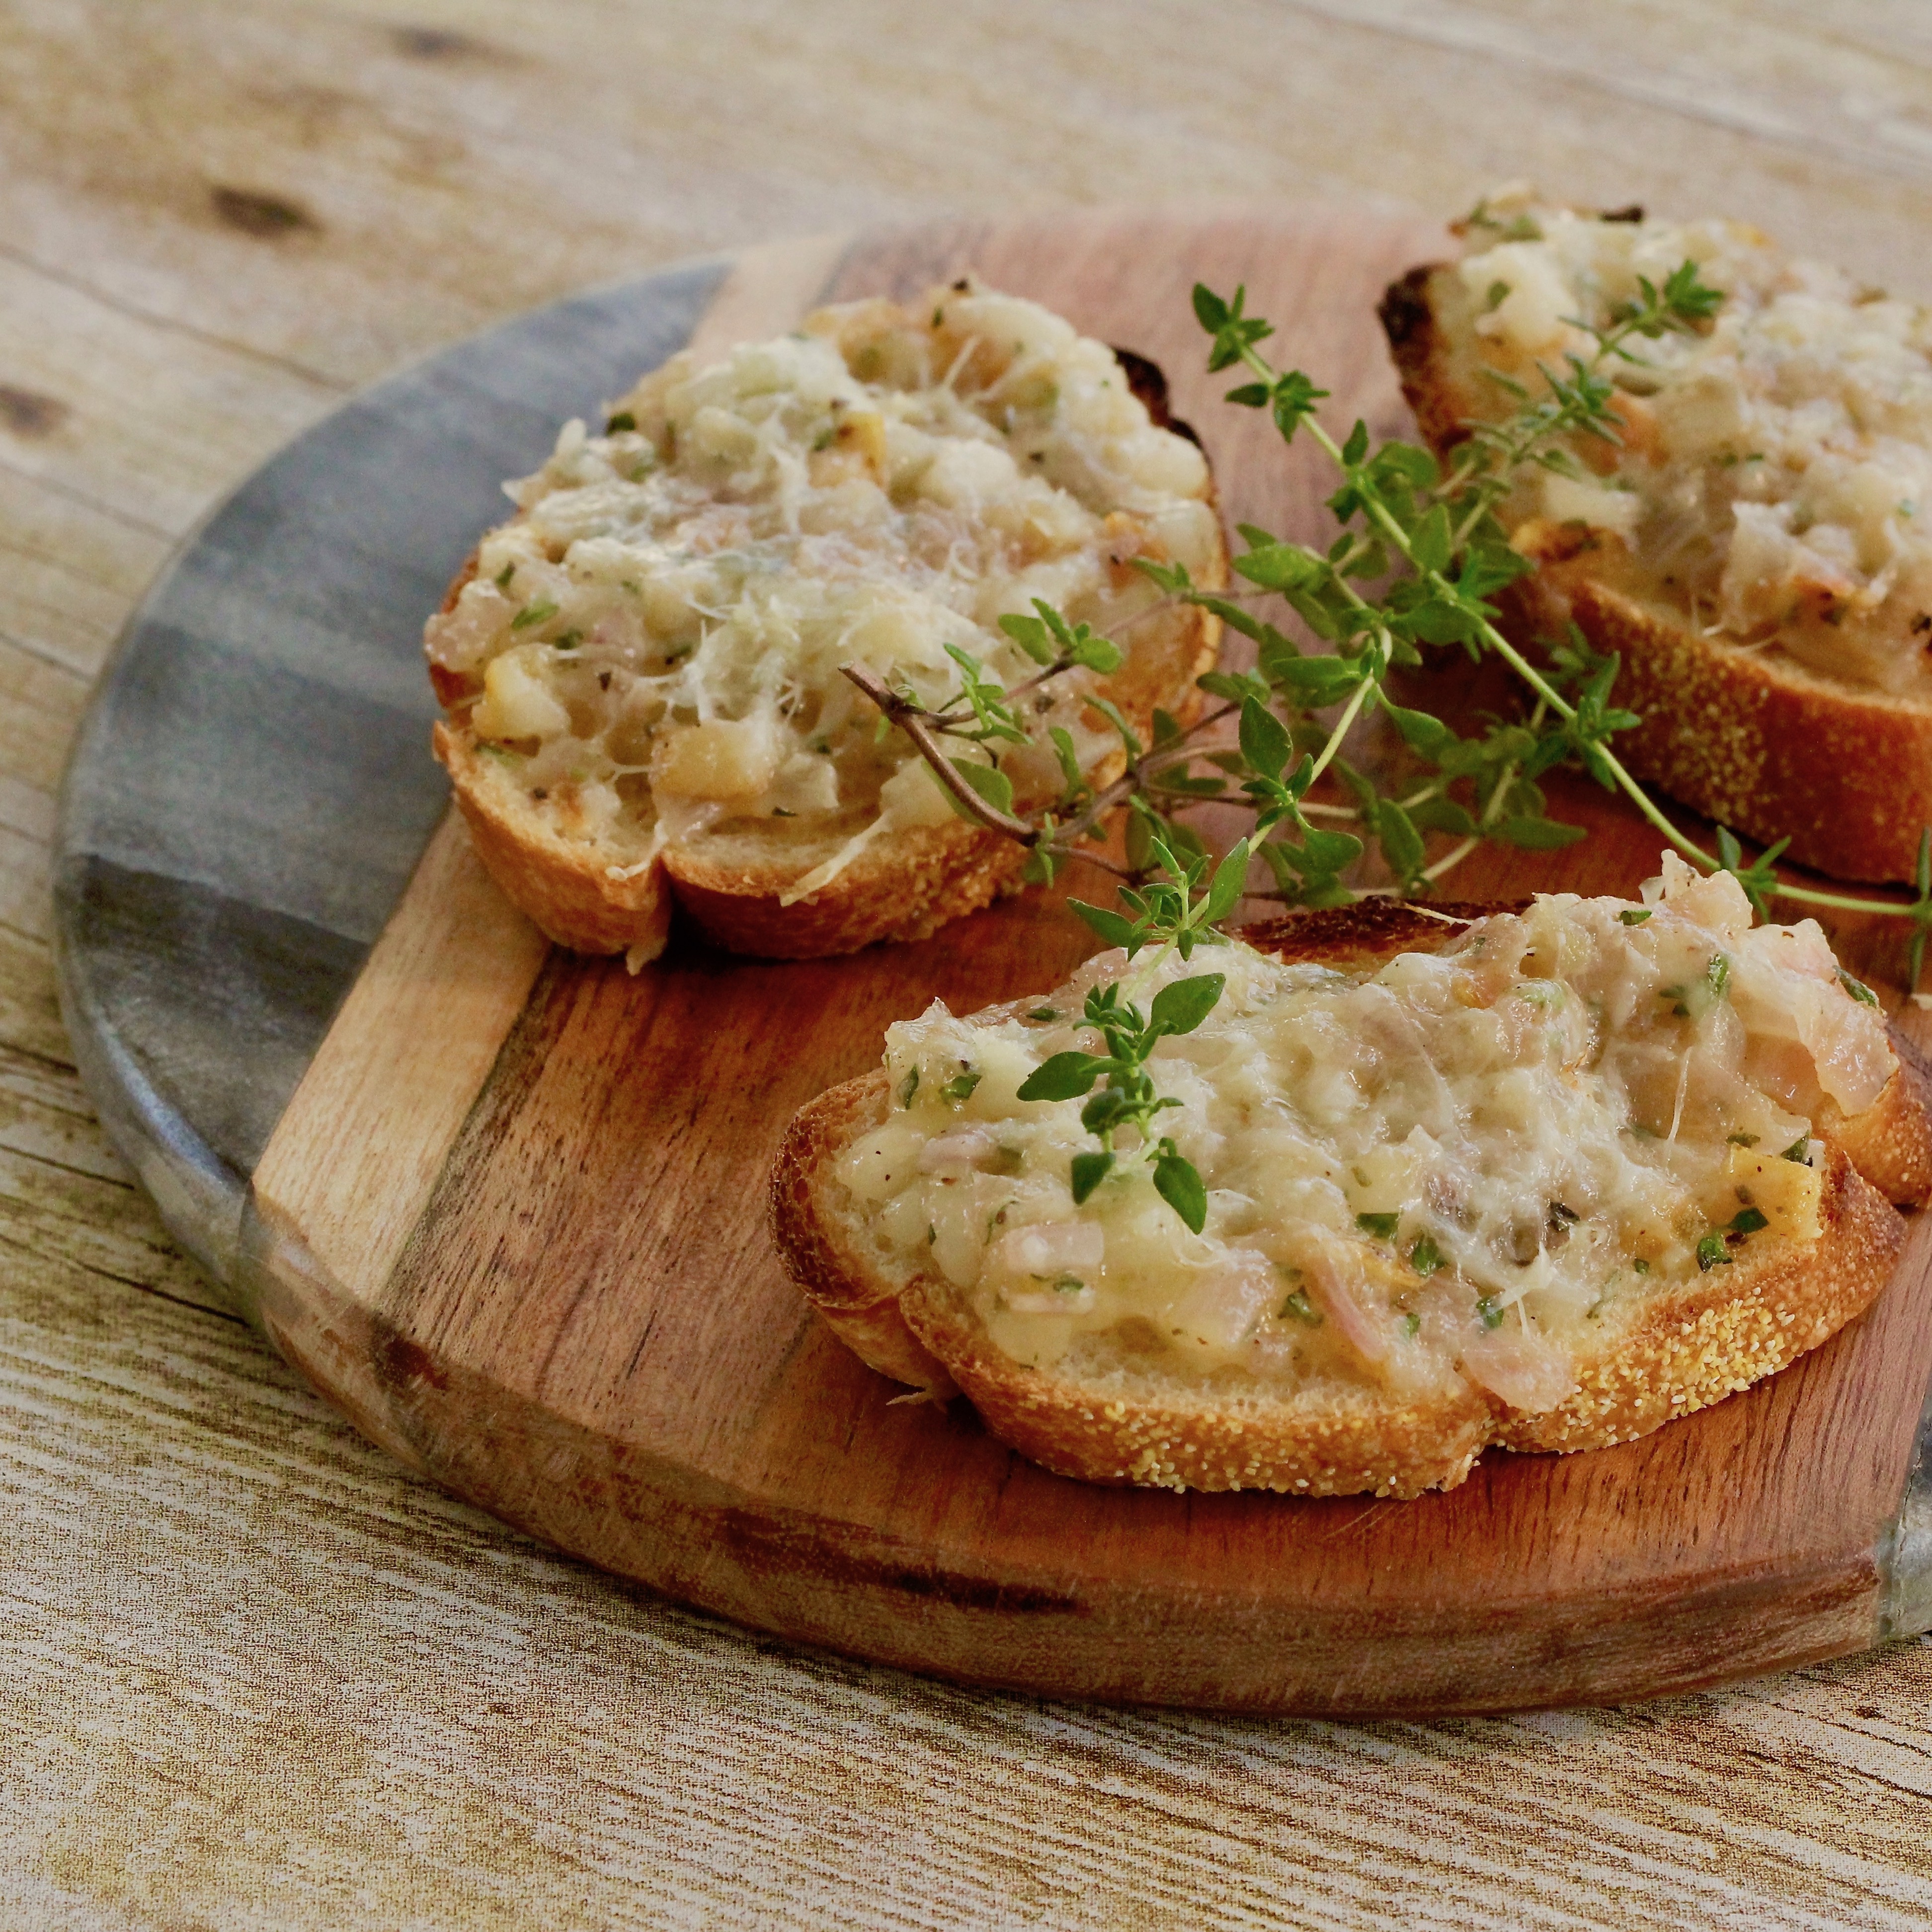 Crostini with Pear, Parmesan, and Caramelized Shallots